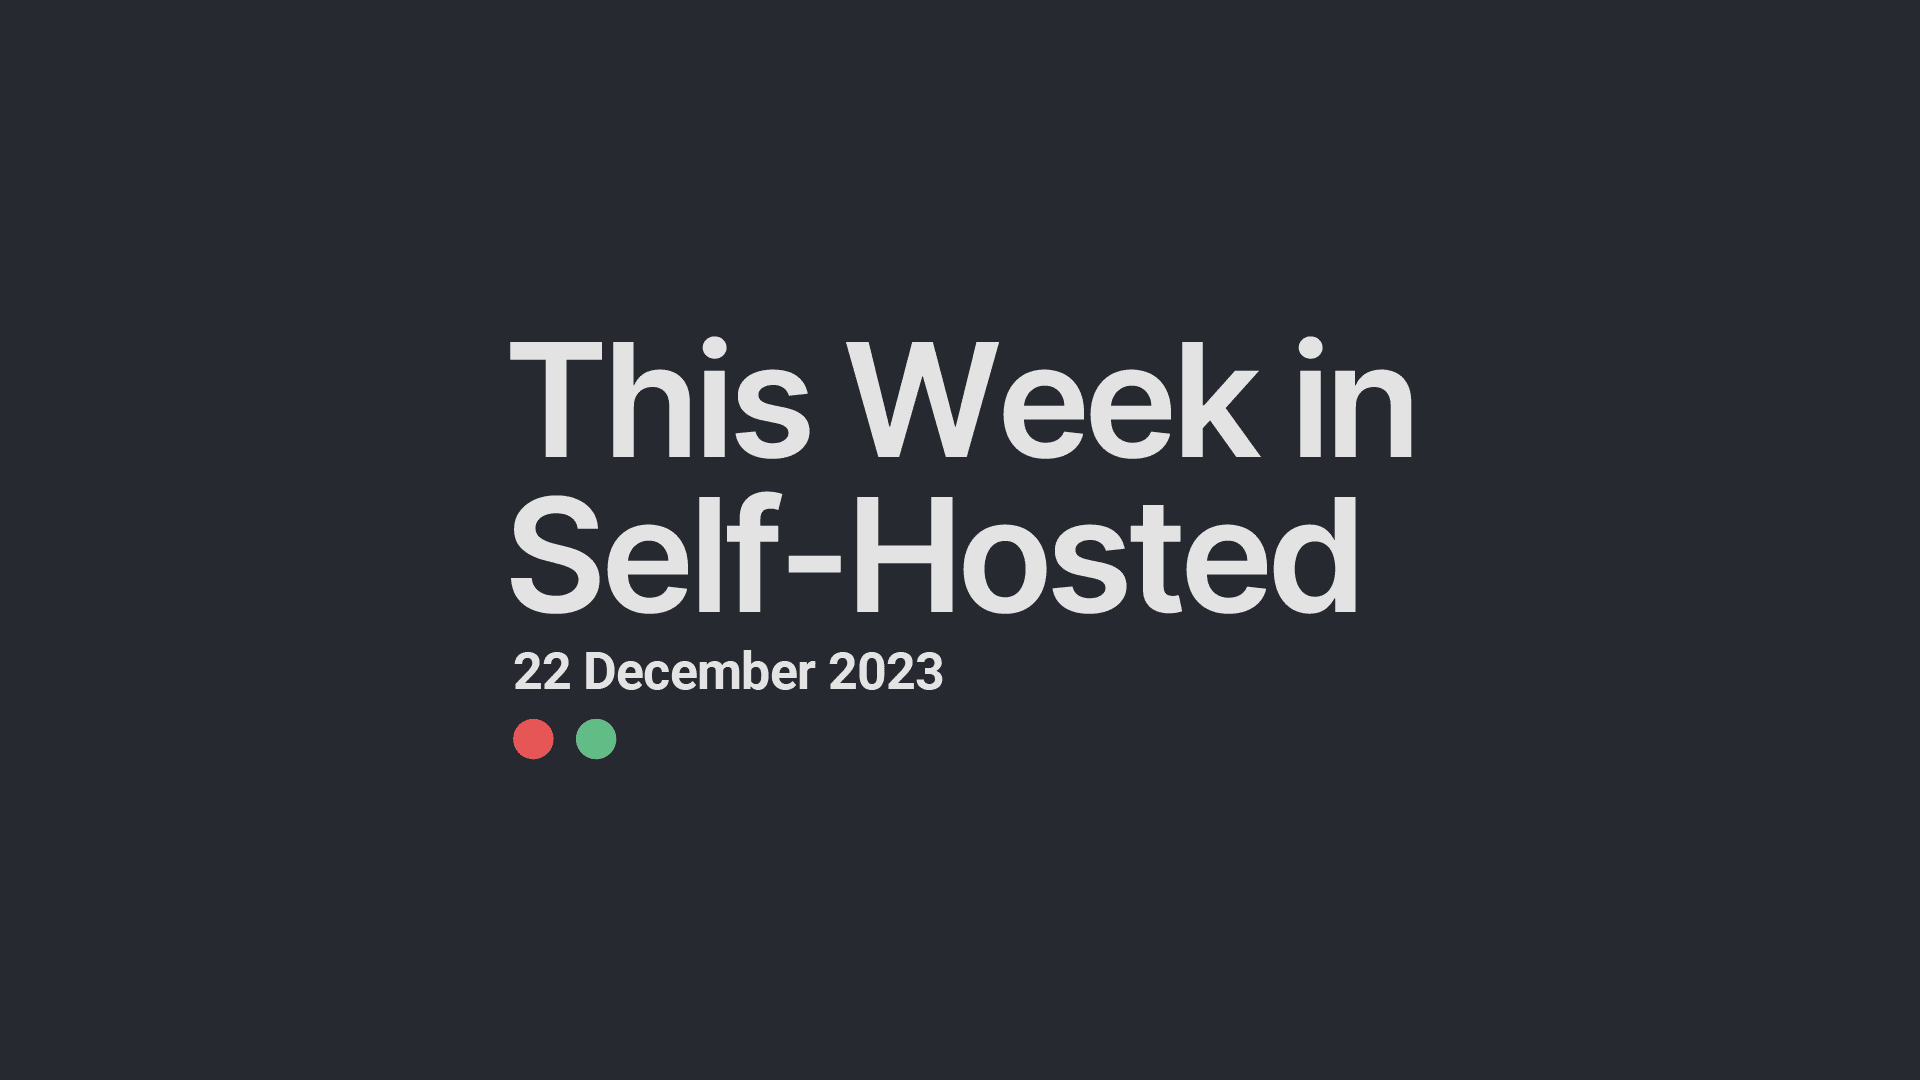 This Week in Self-Hosted (22 December 2023) Post image